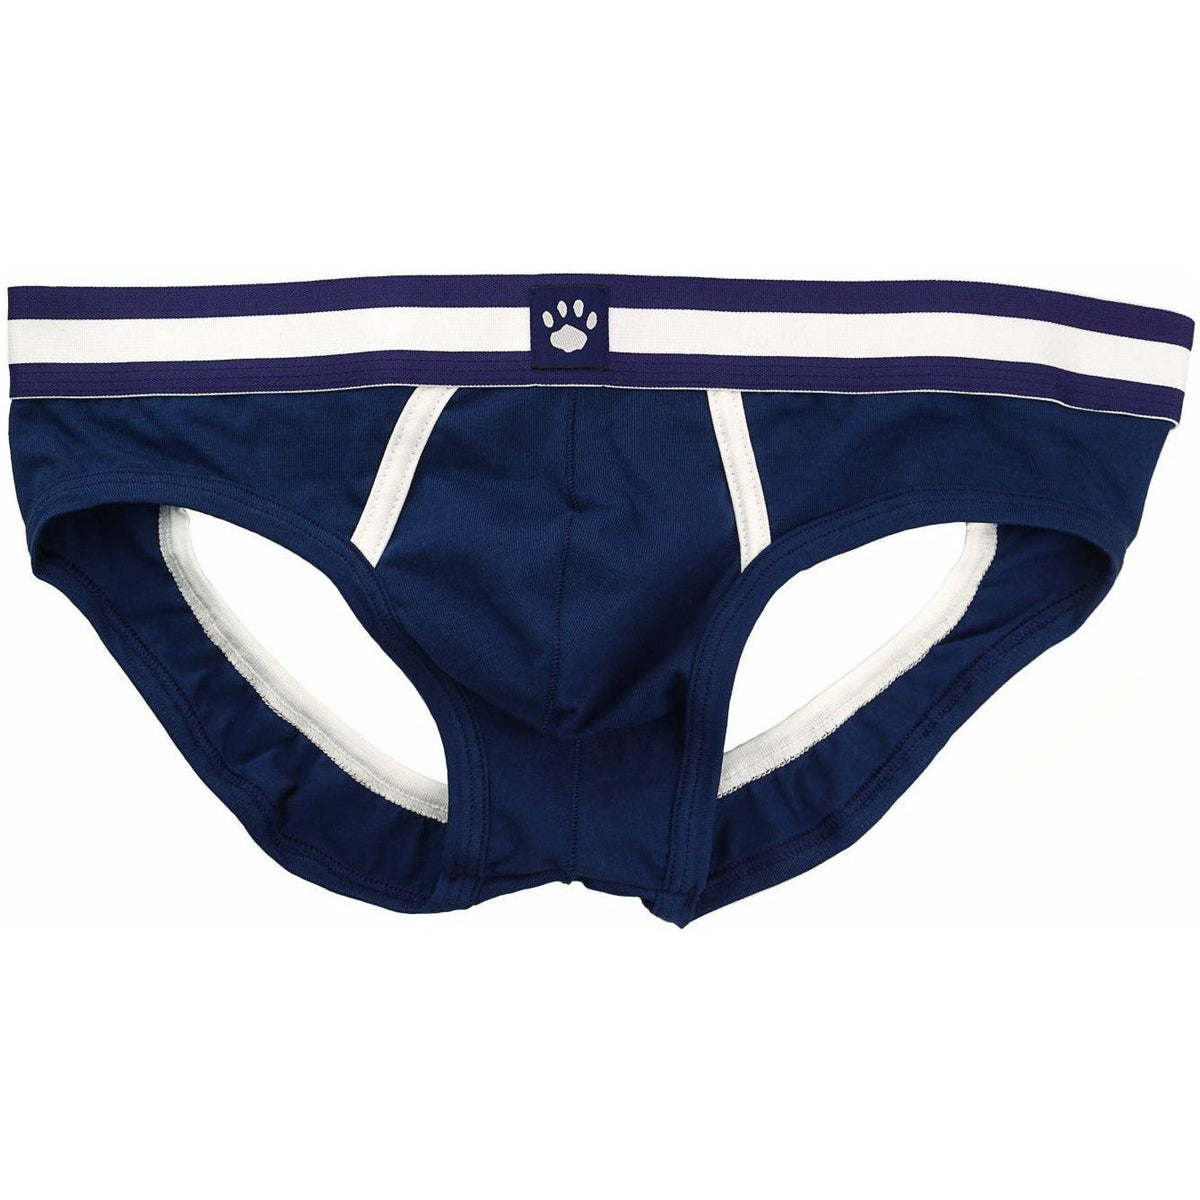 Prowler Classic Backless Brief – Navy/White - Small